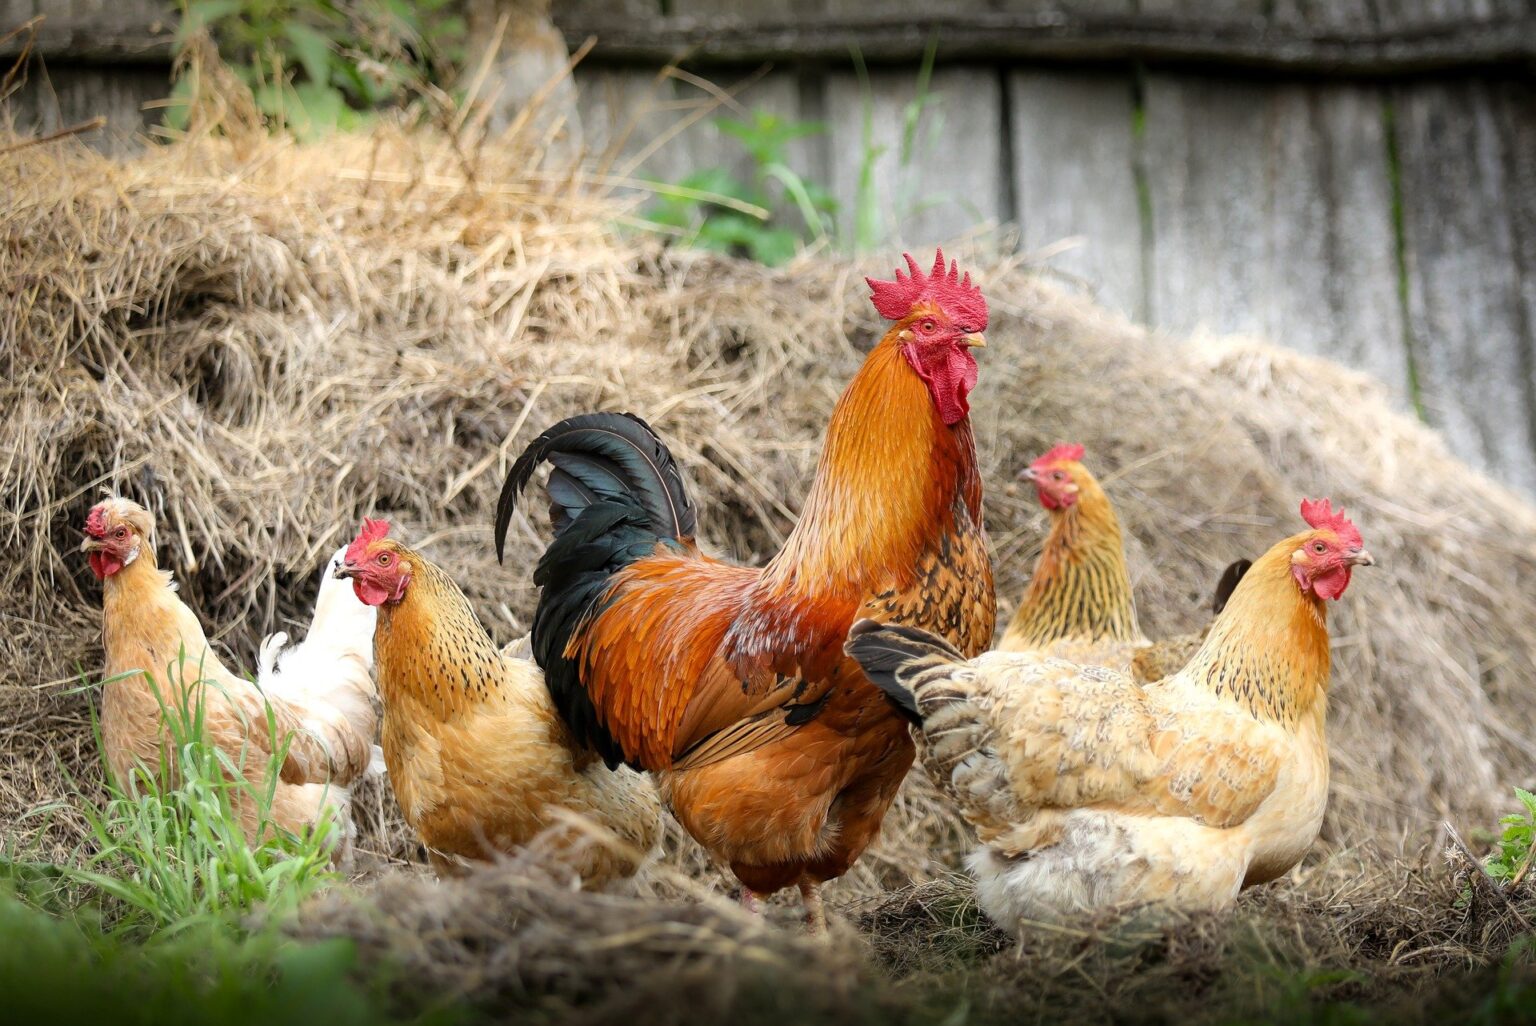 group of chickens outdoors